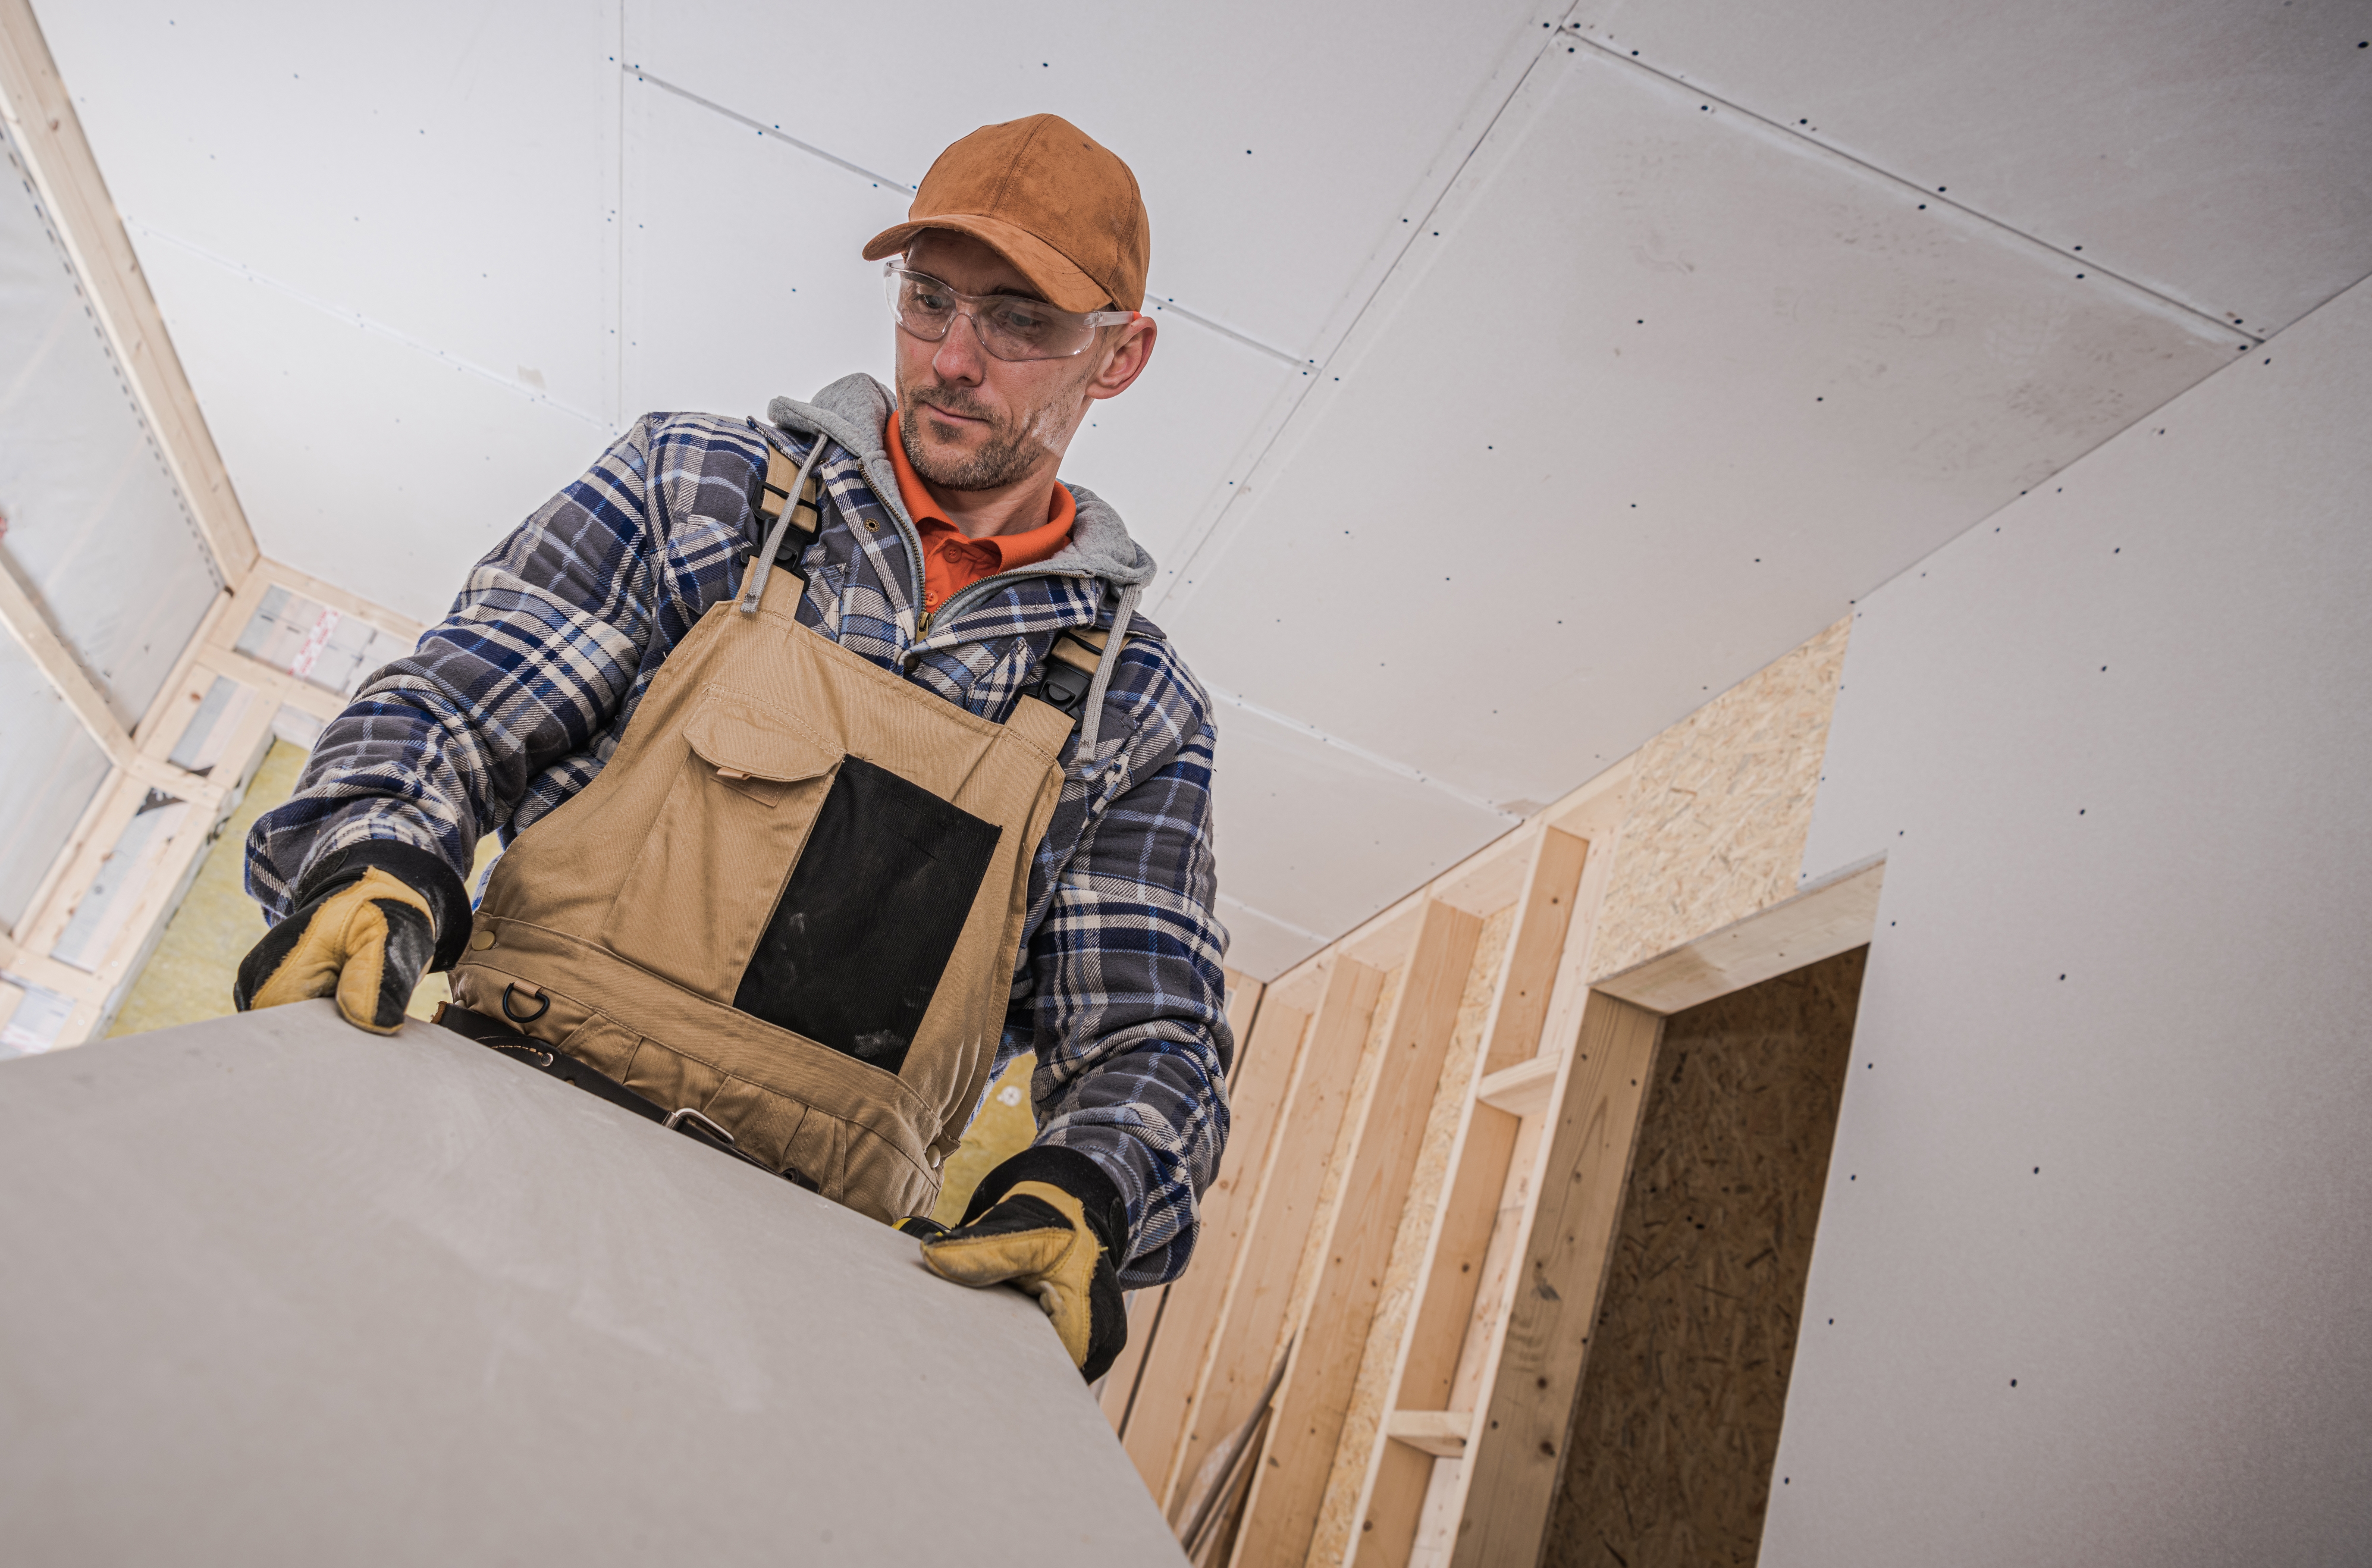 Middlesex County Drywall Contractor: Choosing the Right One